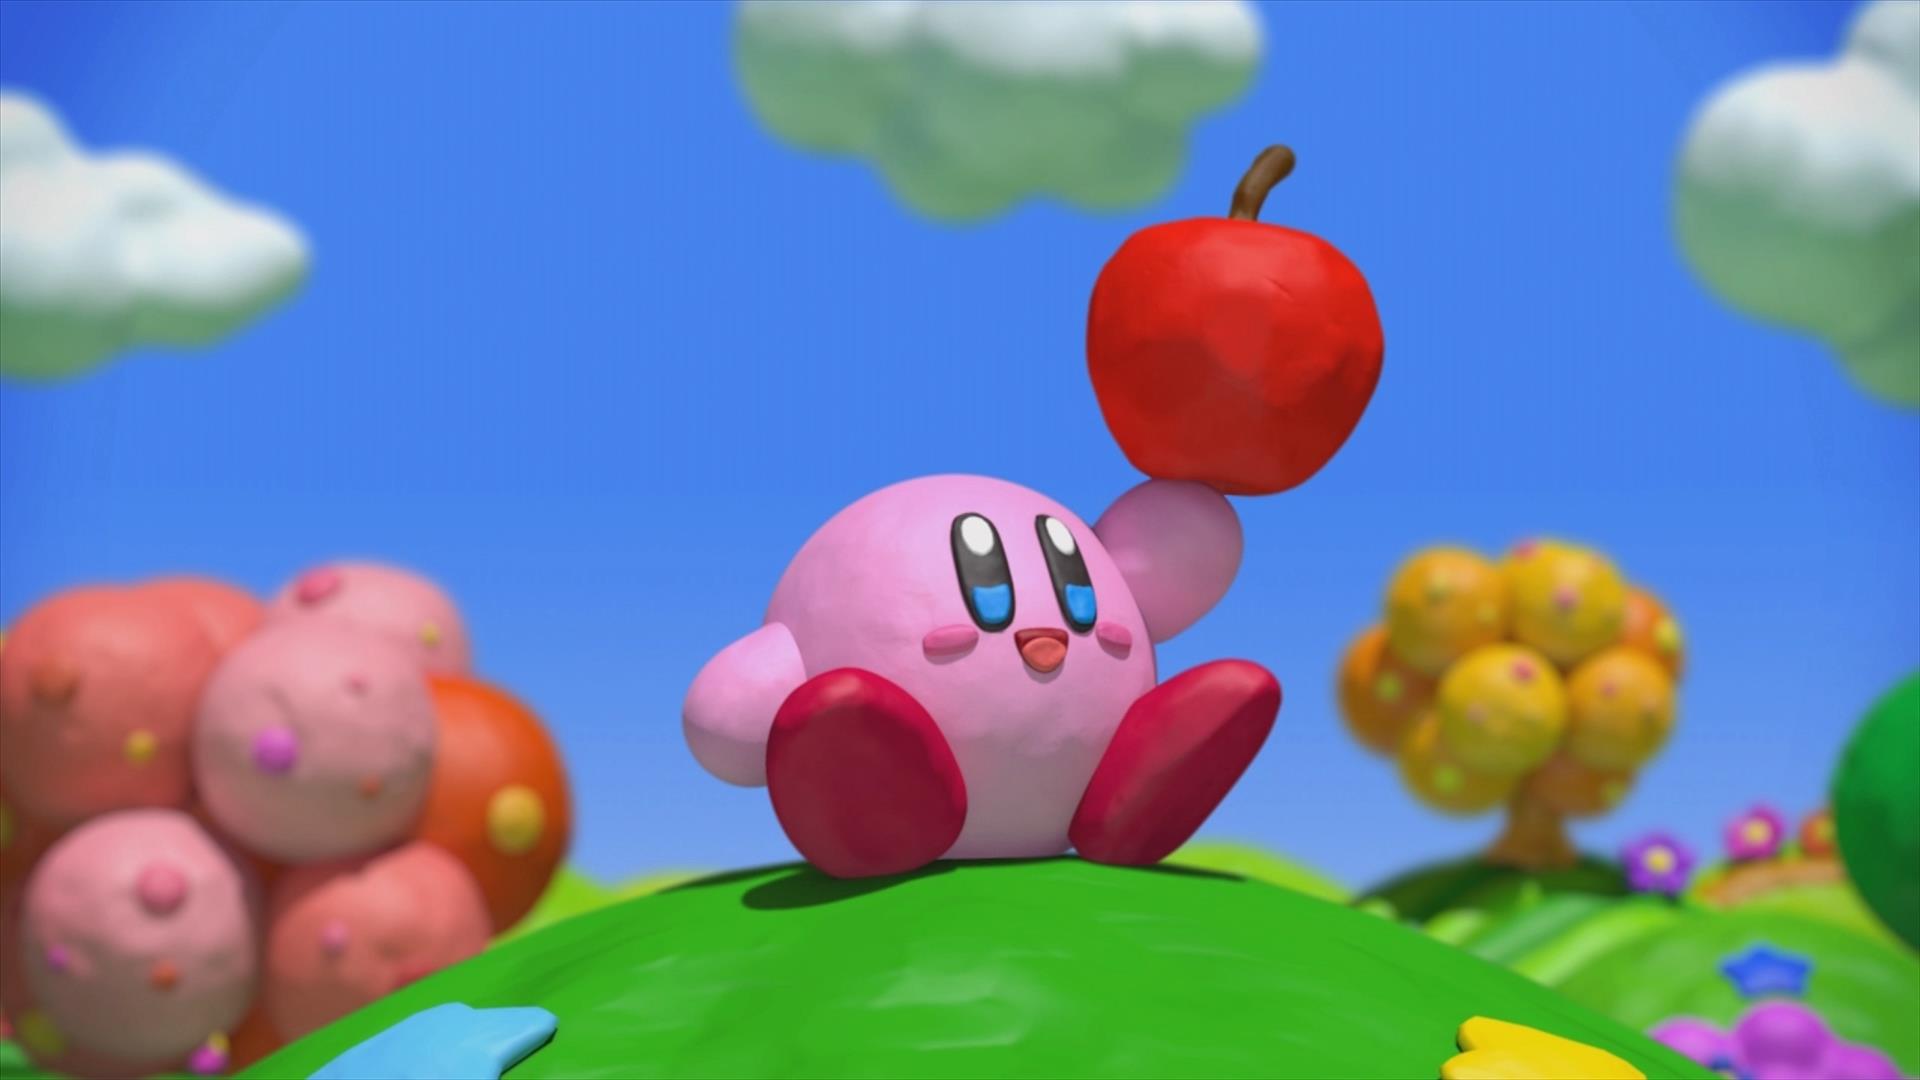 Video Game Kirby and the Rainbow Curse HD Wallpaper | Background Image